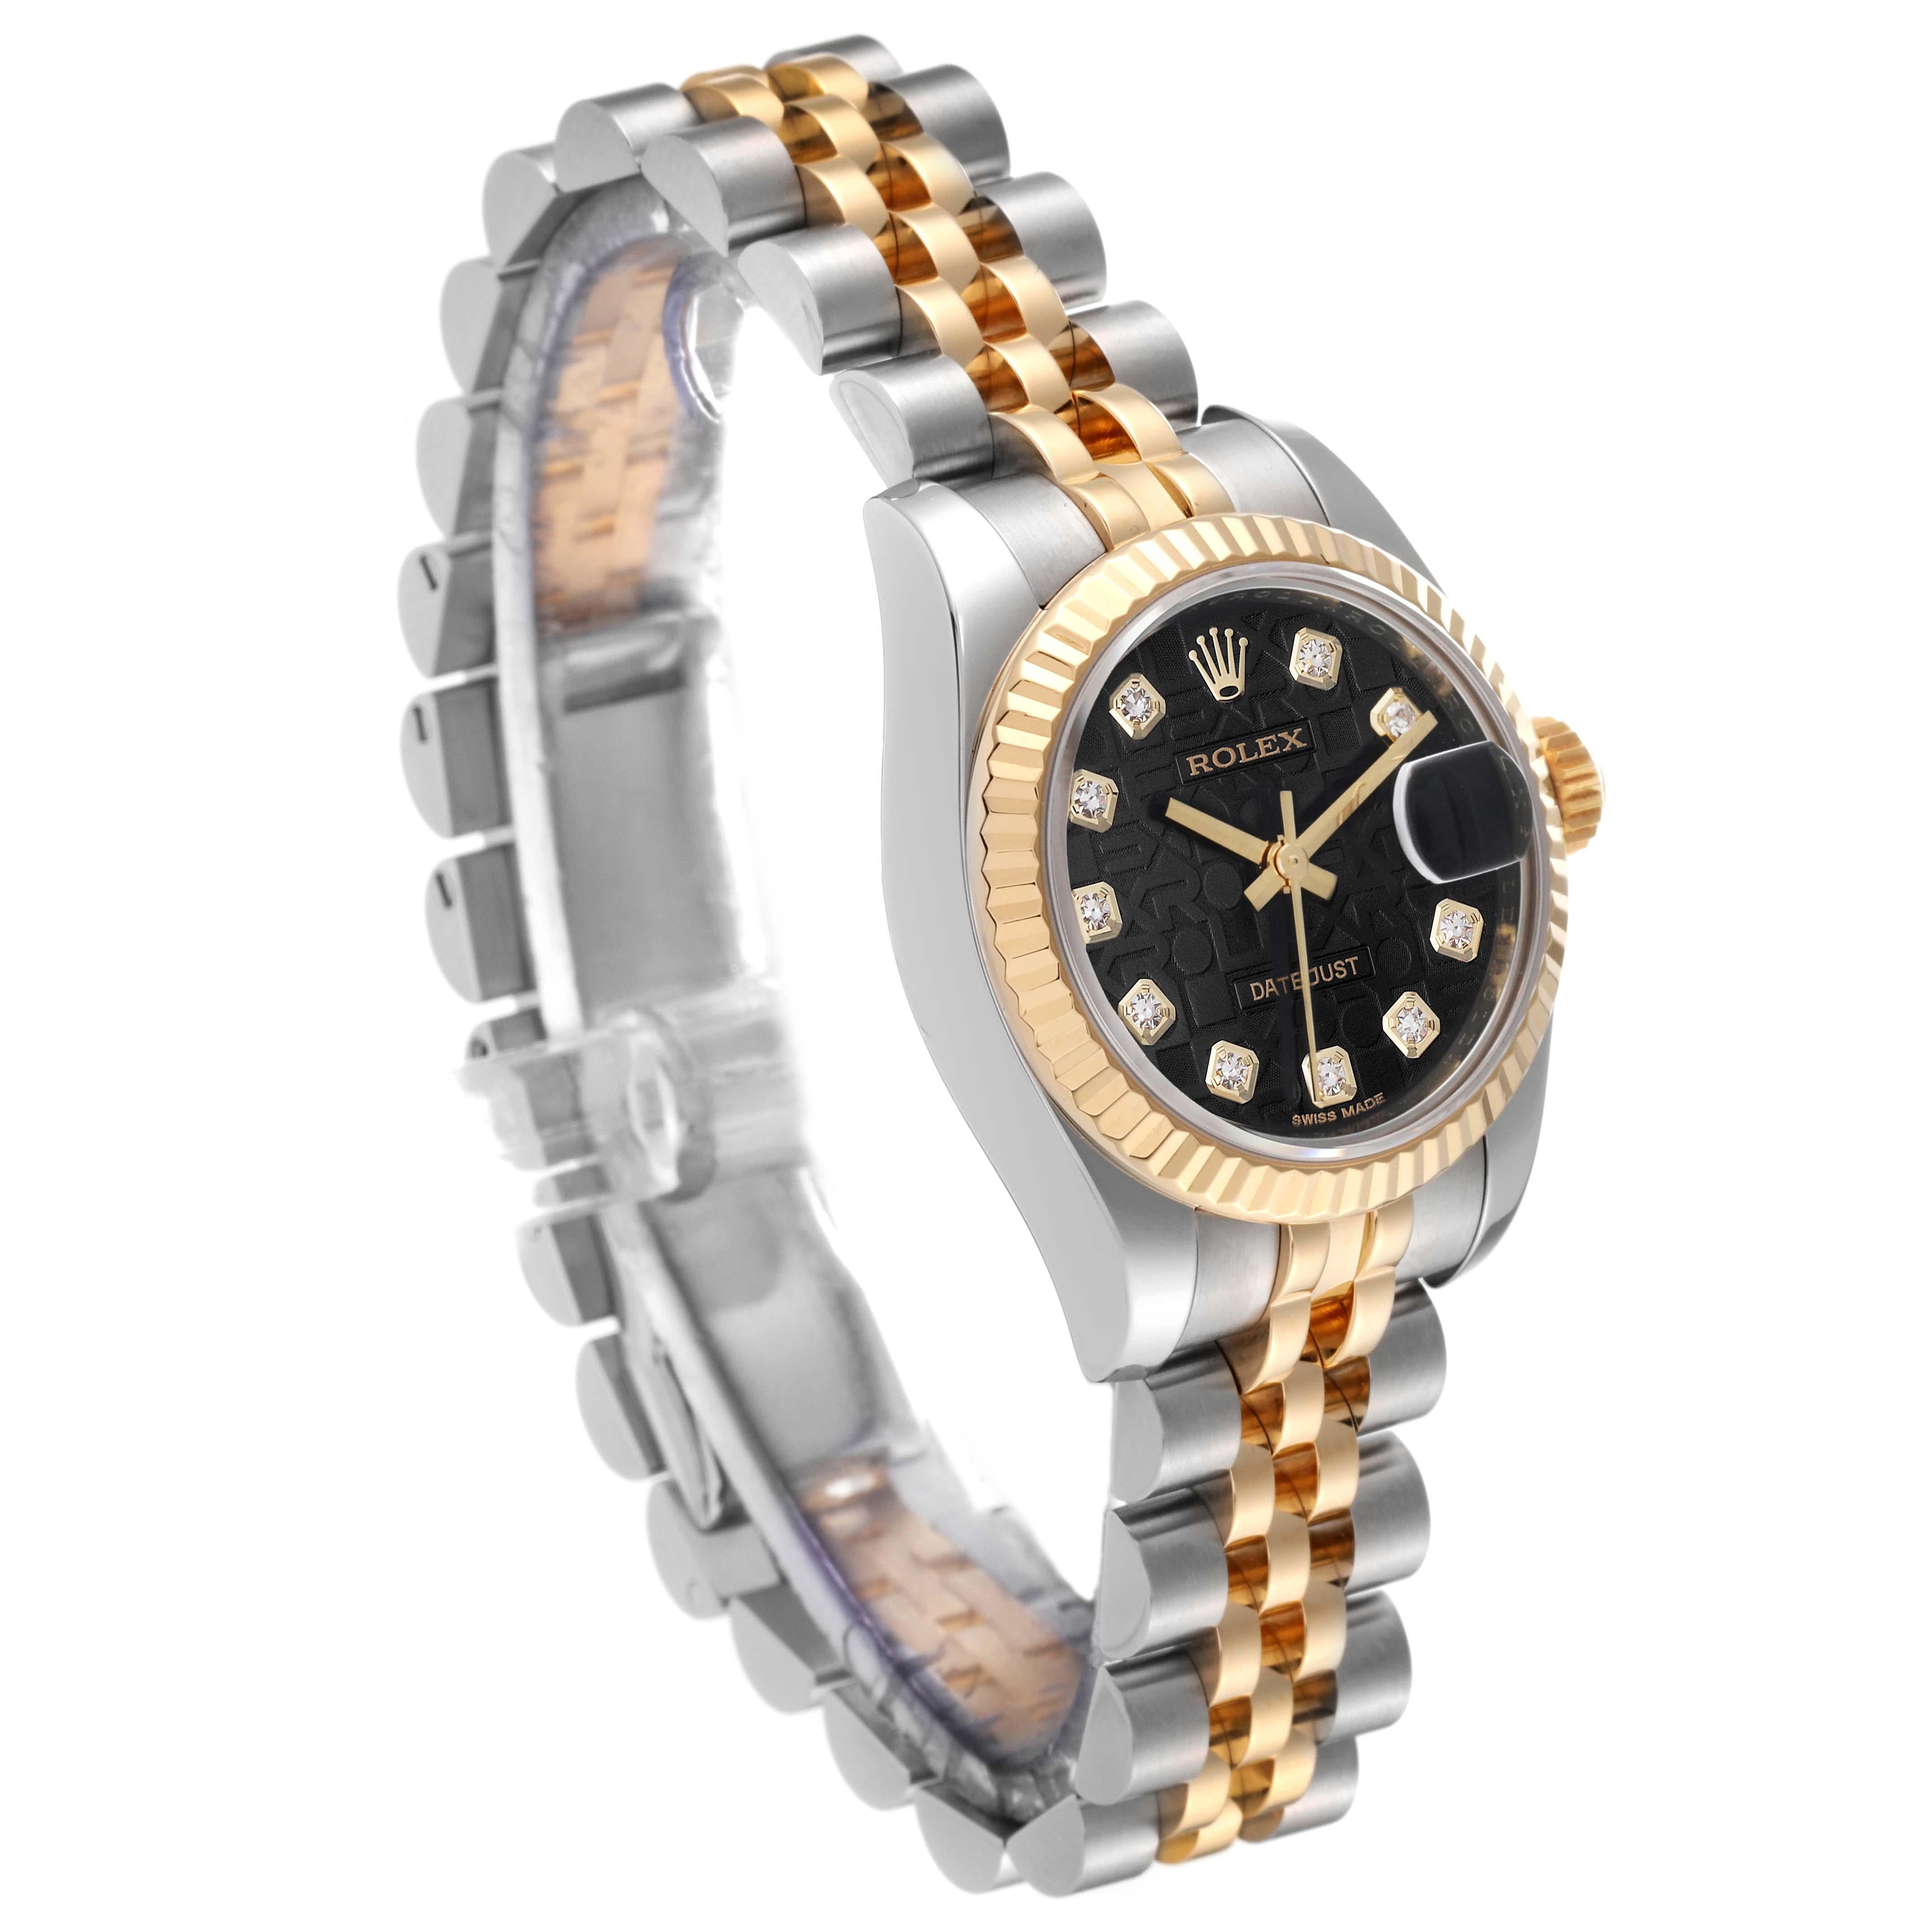 Rolex Datejust Diamond Dial Steel Yellow Gold Ladies Watch 179173 Box Card For Sale 5